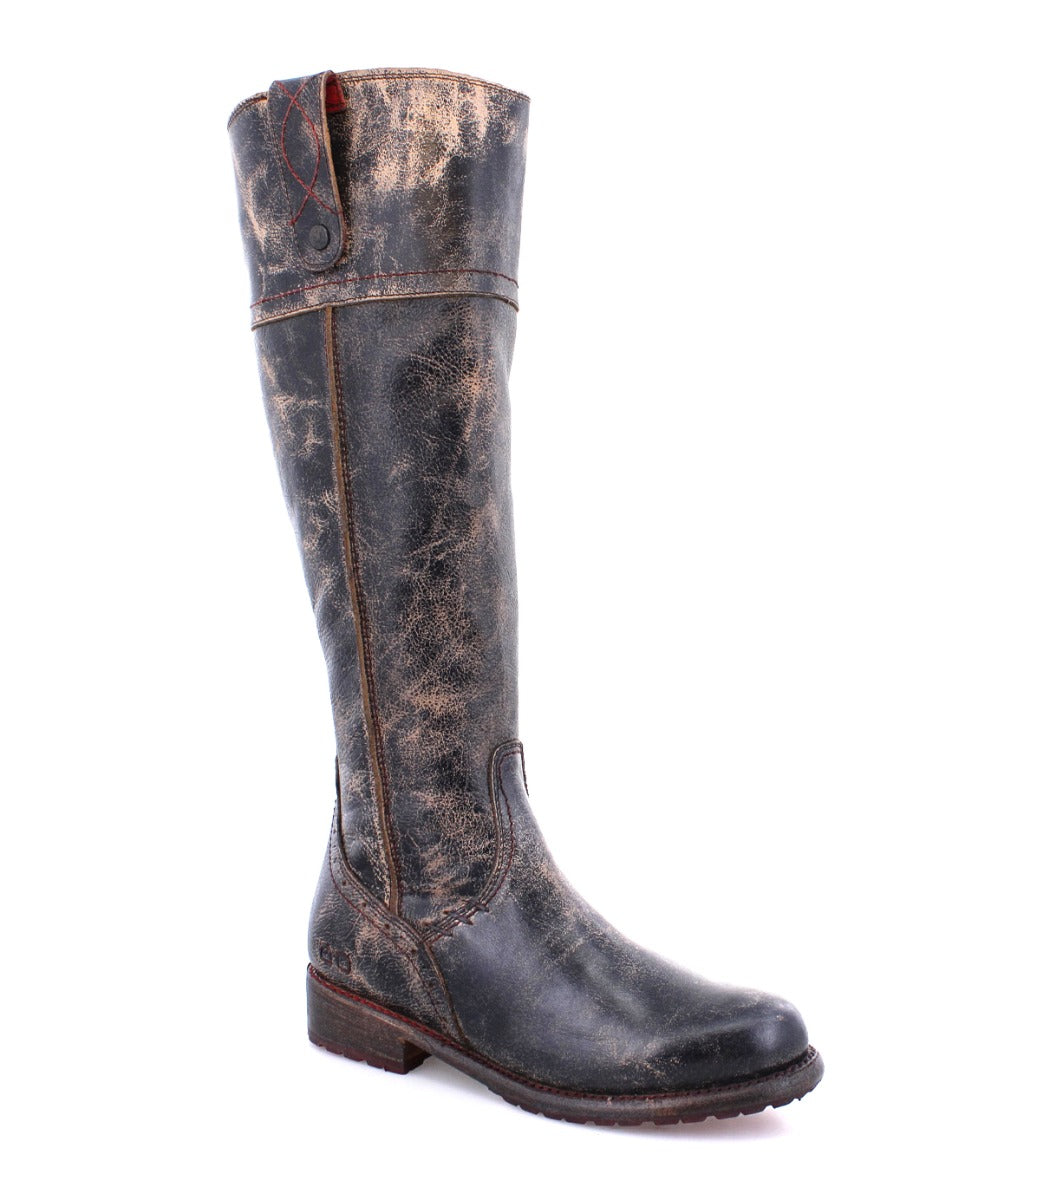 A women's black leather Jacqueline riding boot by Bed Stu.